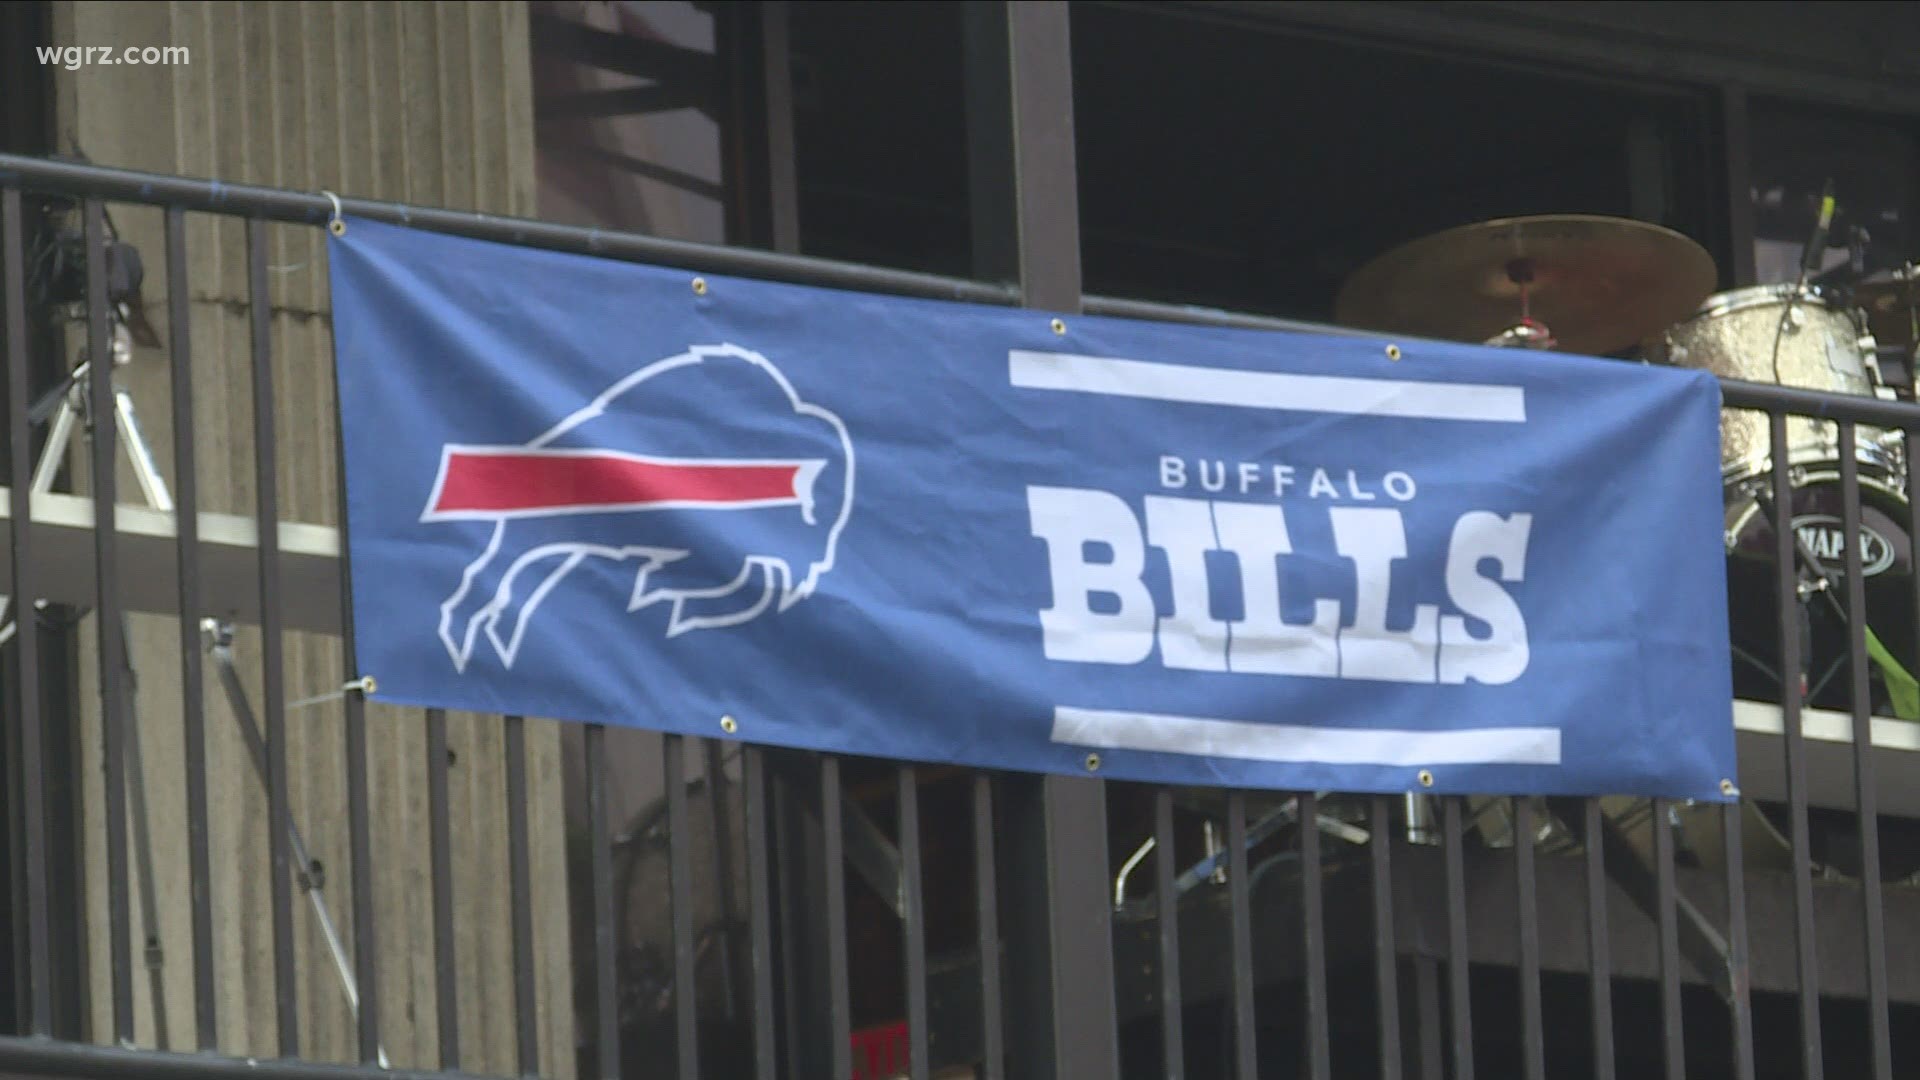 Fans got to sit at tables that allowed social distancing and watch the BILLS GAME.
We spoke with the owner of the soho who was very happy with how it turned out with